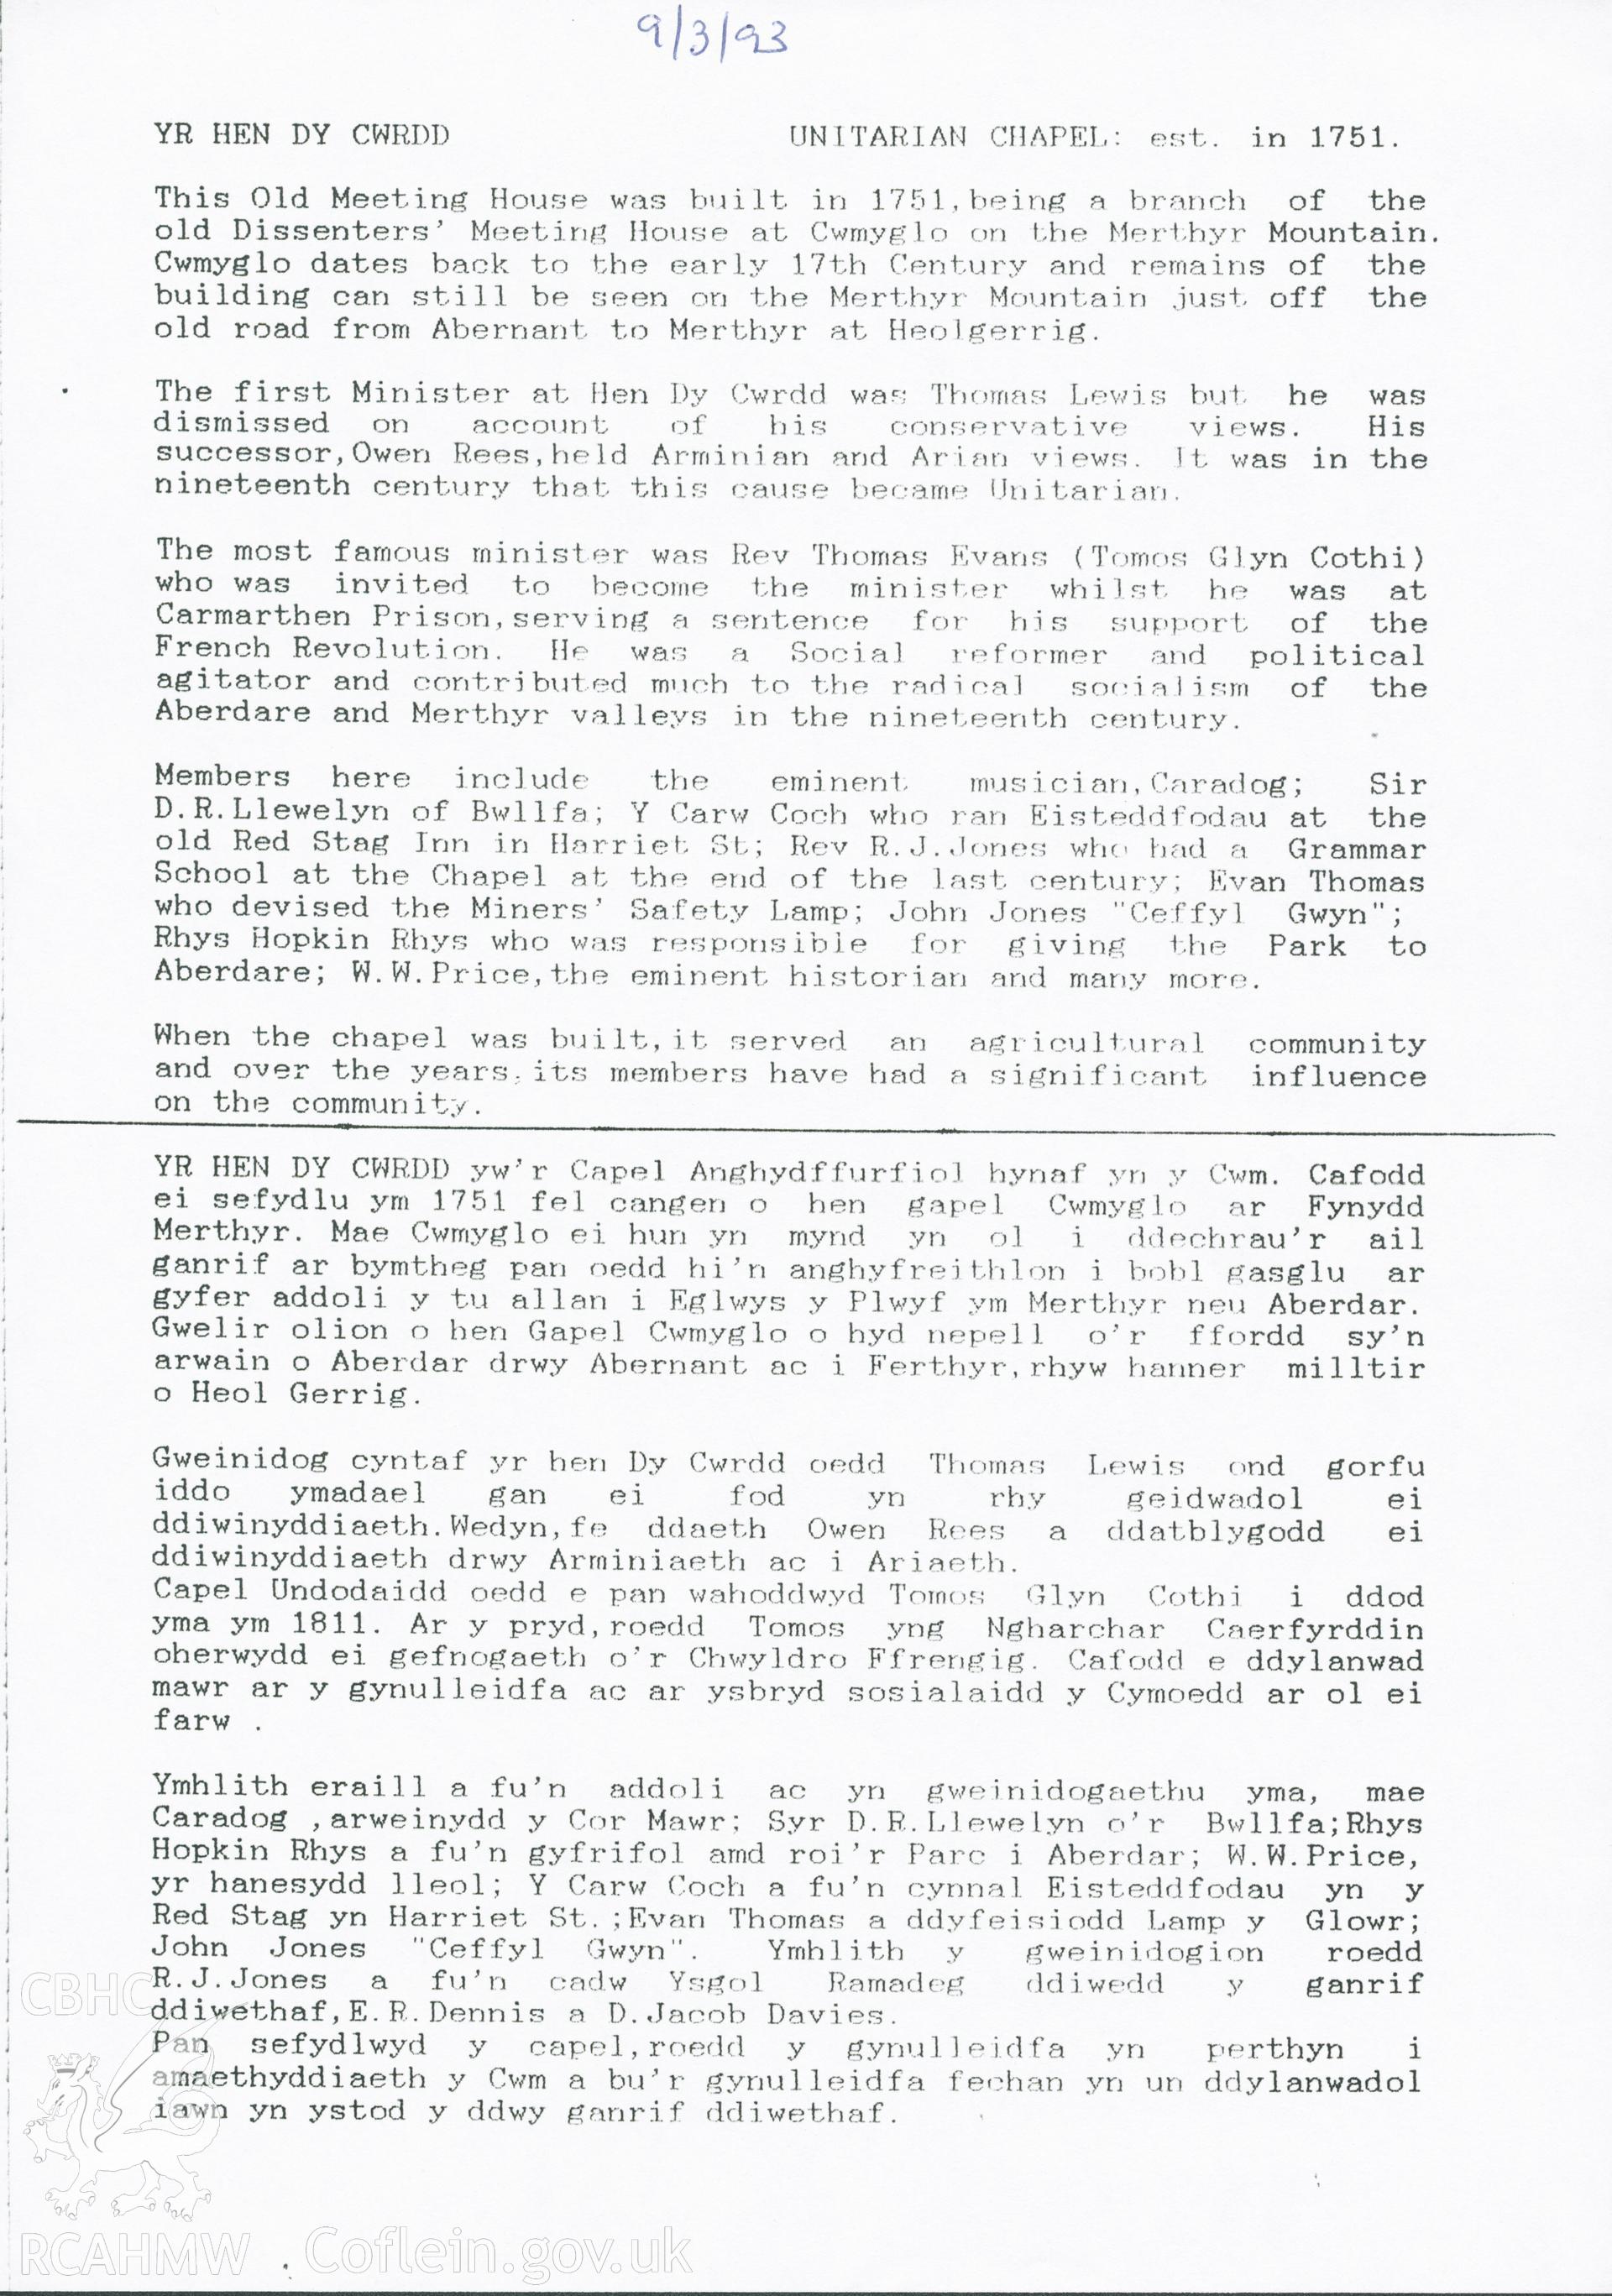 Bilingual typed document relating a brief history of Yr Hen Dy Cwrdd. Donated to the RCAHMW during the Digital Dissent Project.